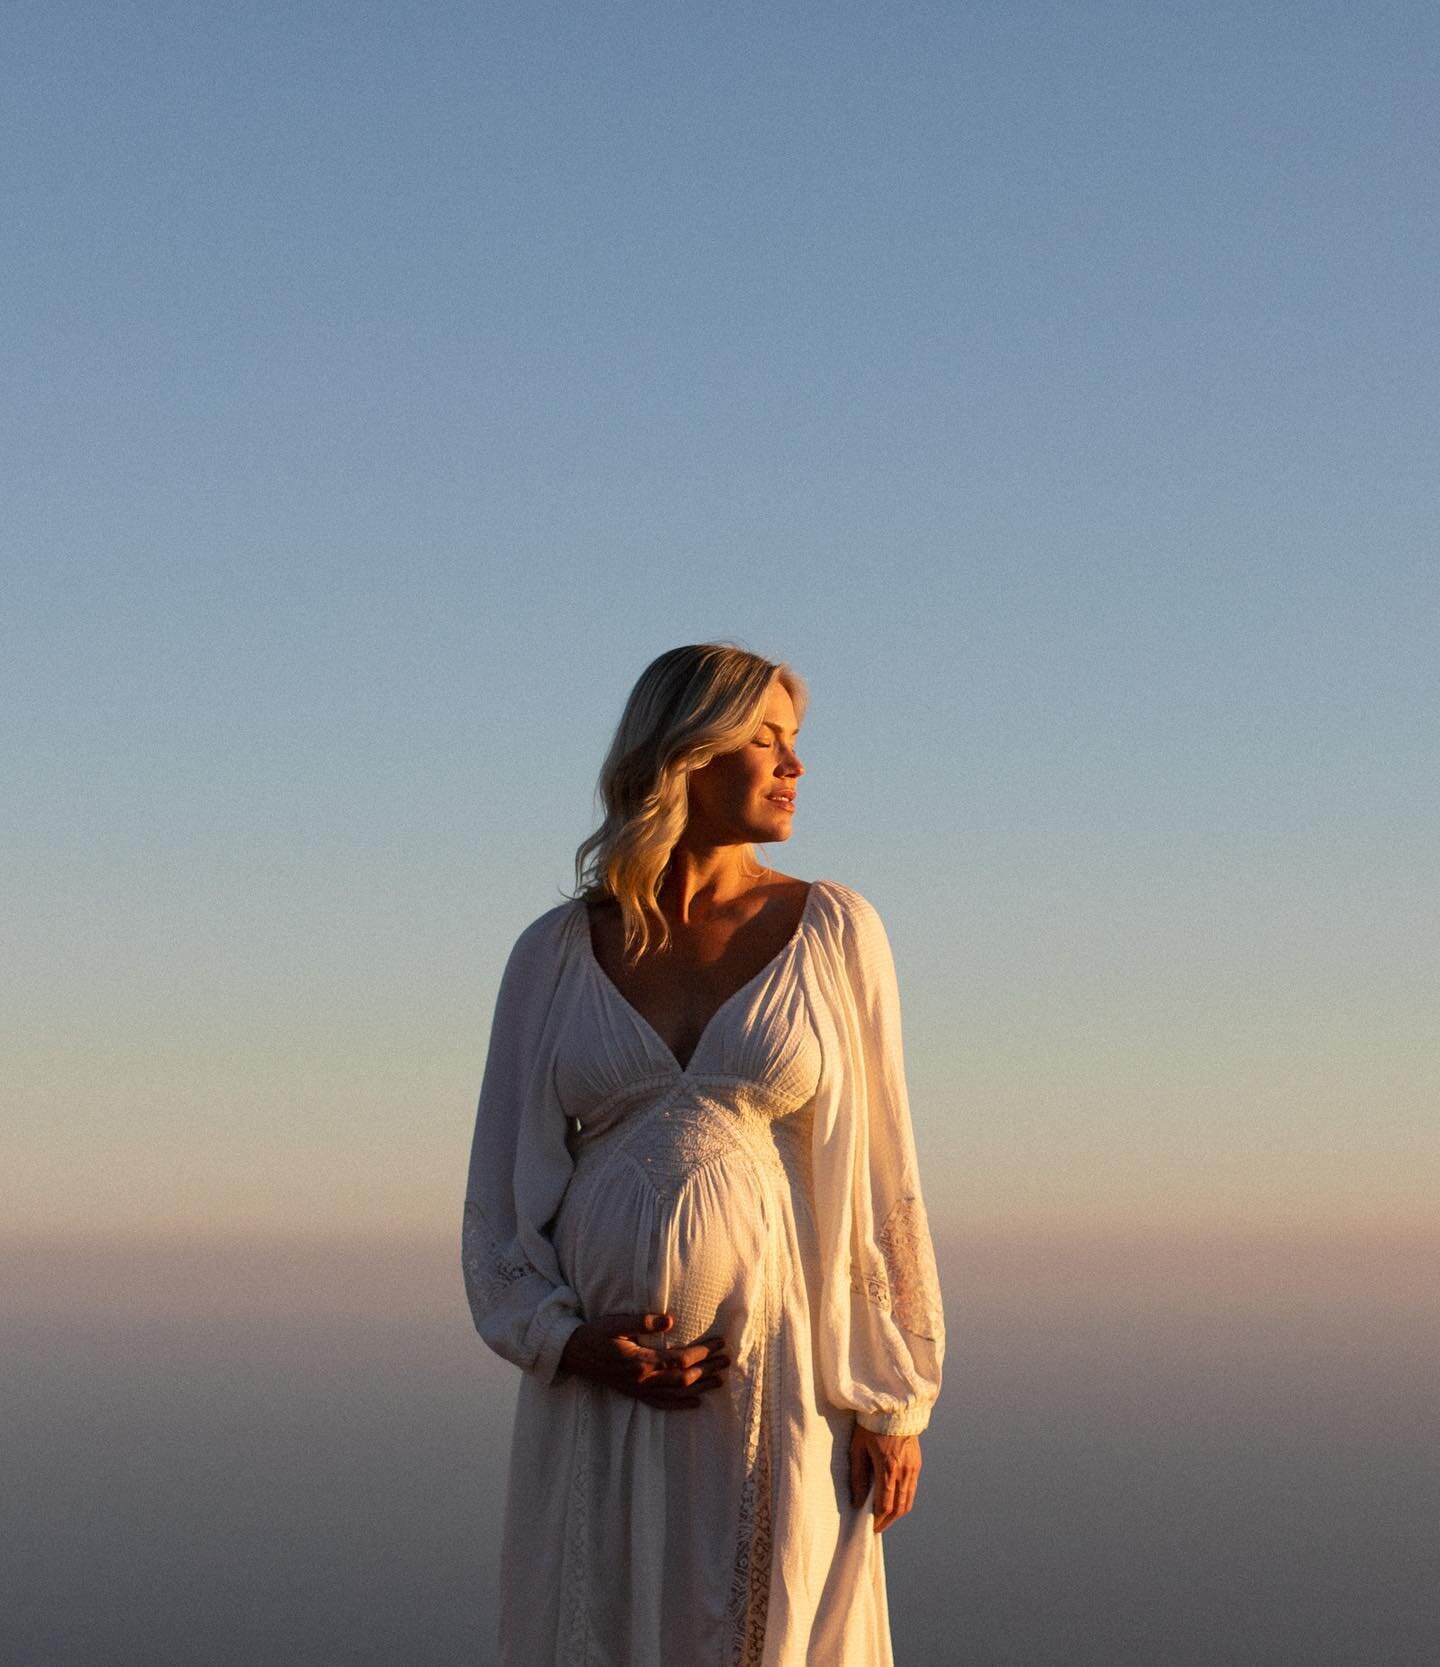 TESTIMONIAL OF THE HEART 🦋

&ldquo;Working with Olivia is so much more than a photoshoot. She ushered me into a sacred space and I was able to connect with my unborn daughter and with the Earth. It felt supernatural, wild, powerful, and true. 

Havi